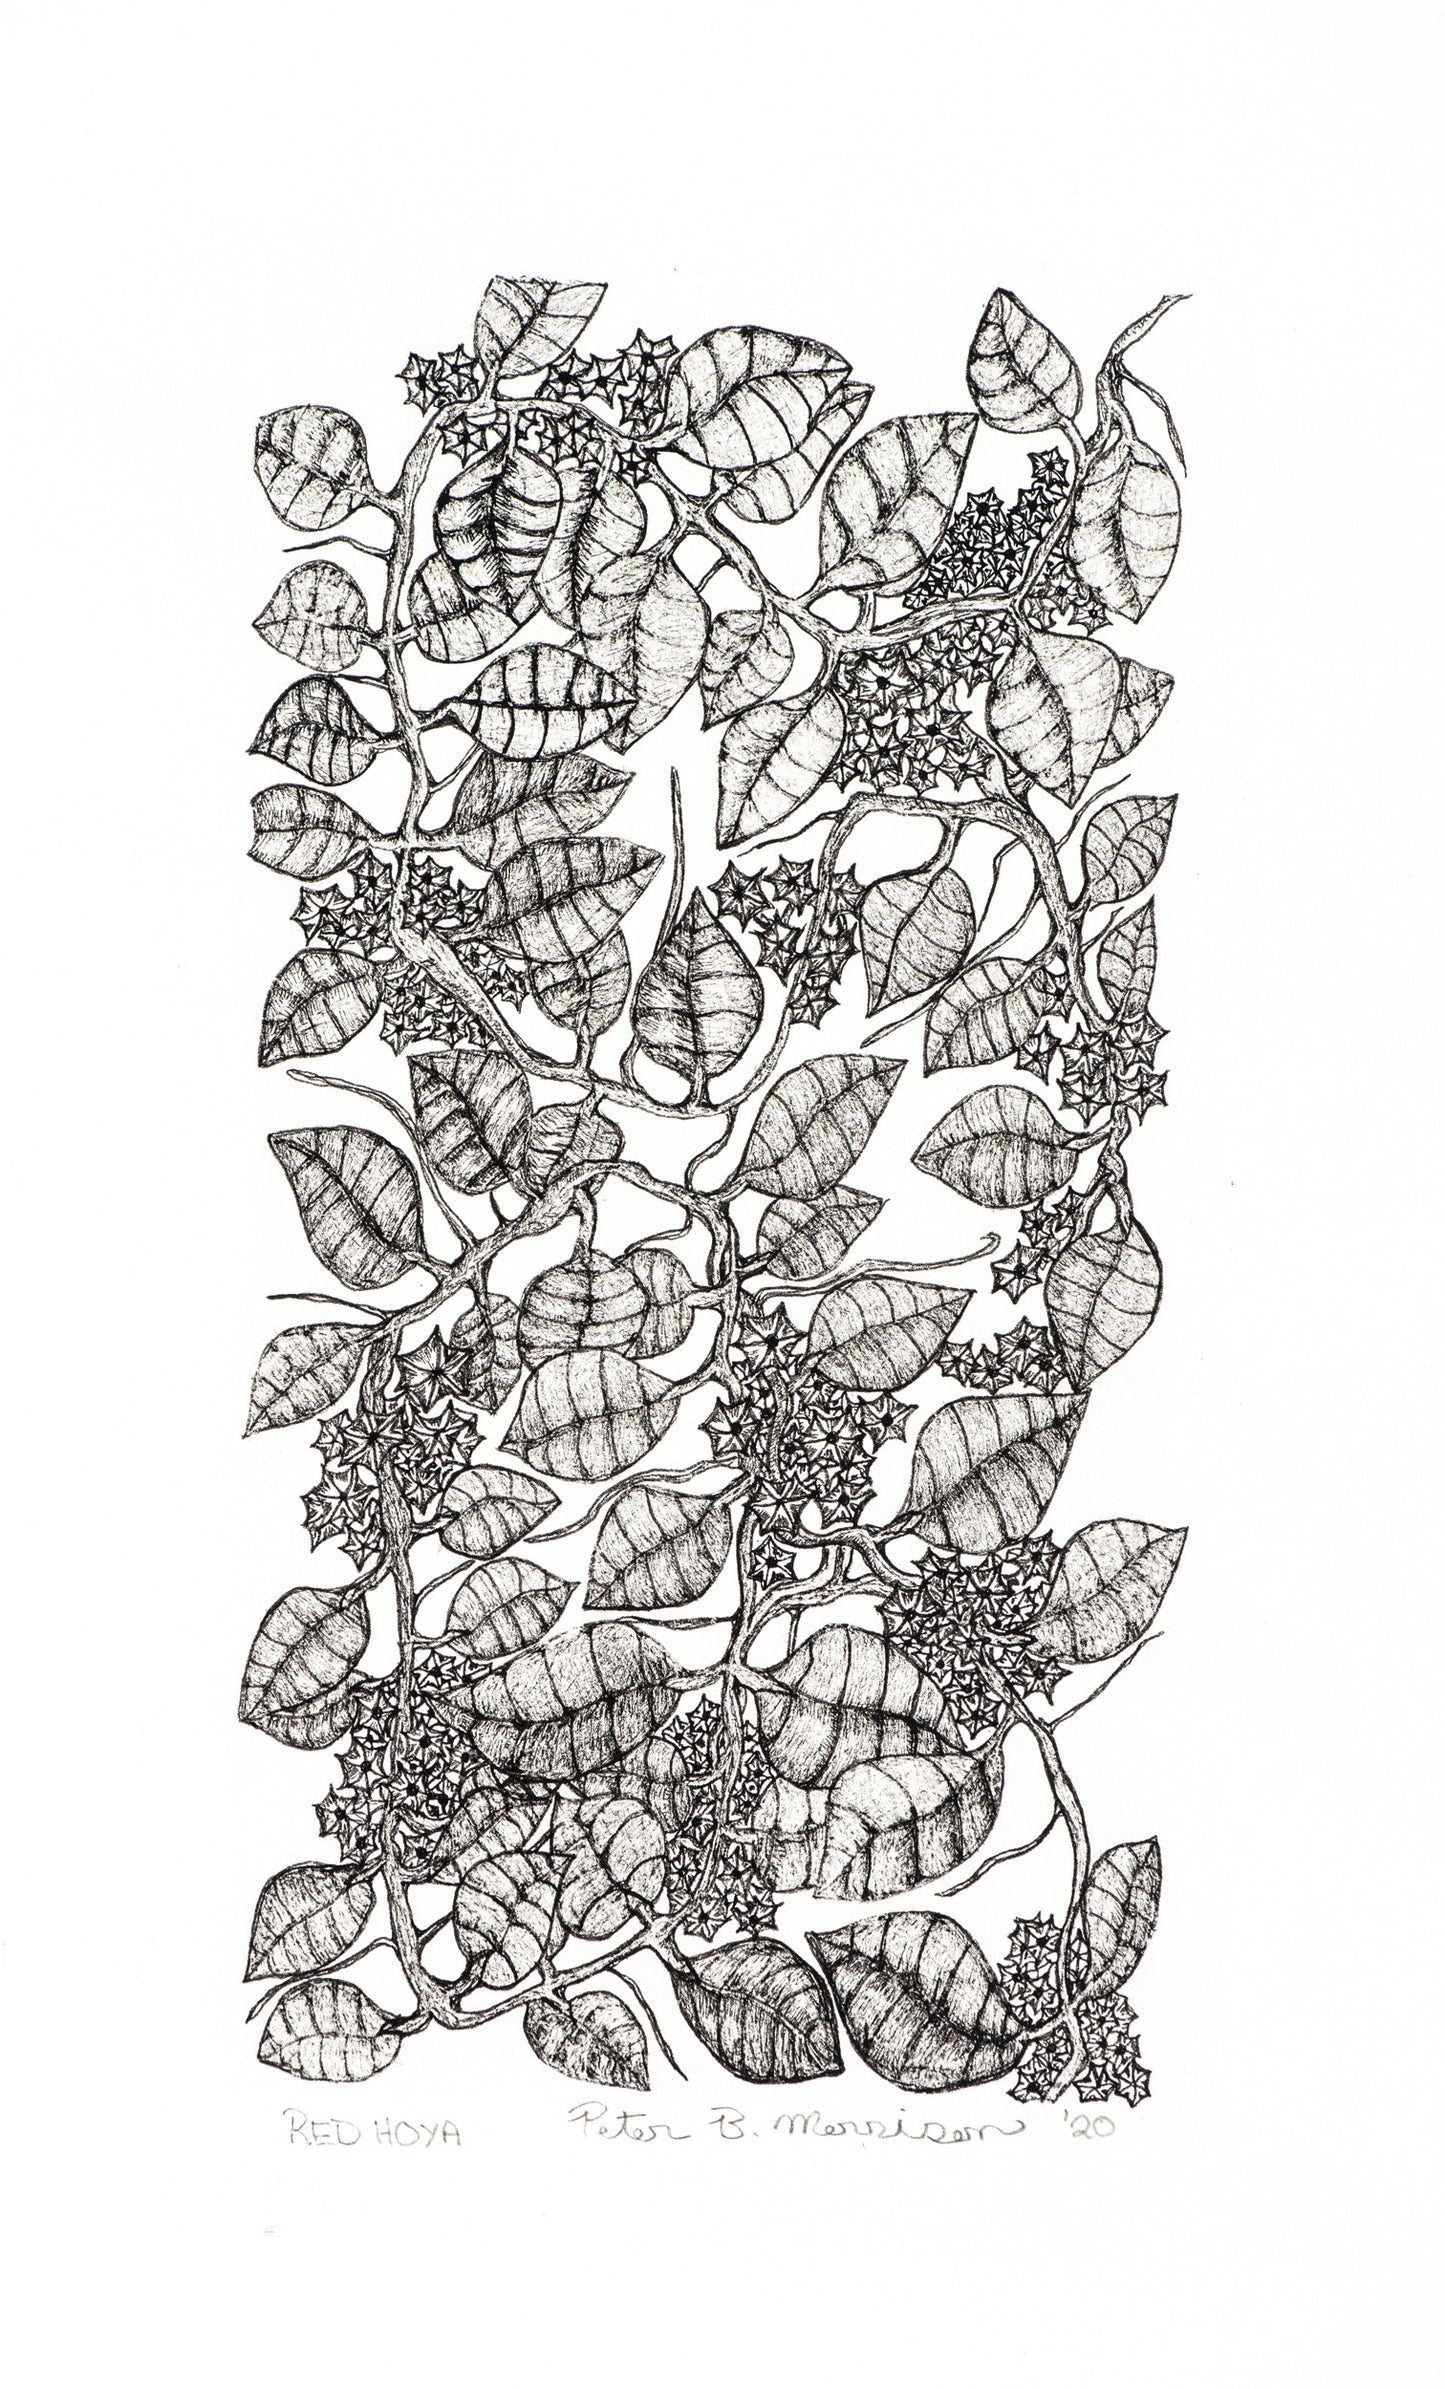 PETER B MORRSION | 'Red Hoya' Drawing | Pen and ink on archival paper